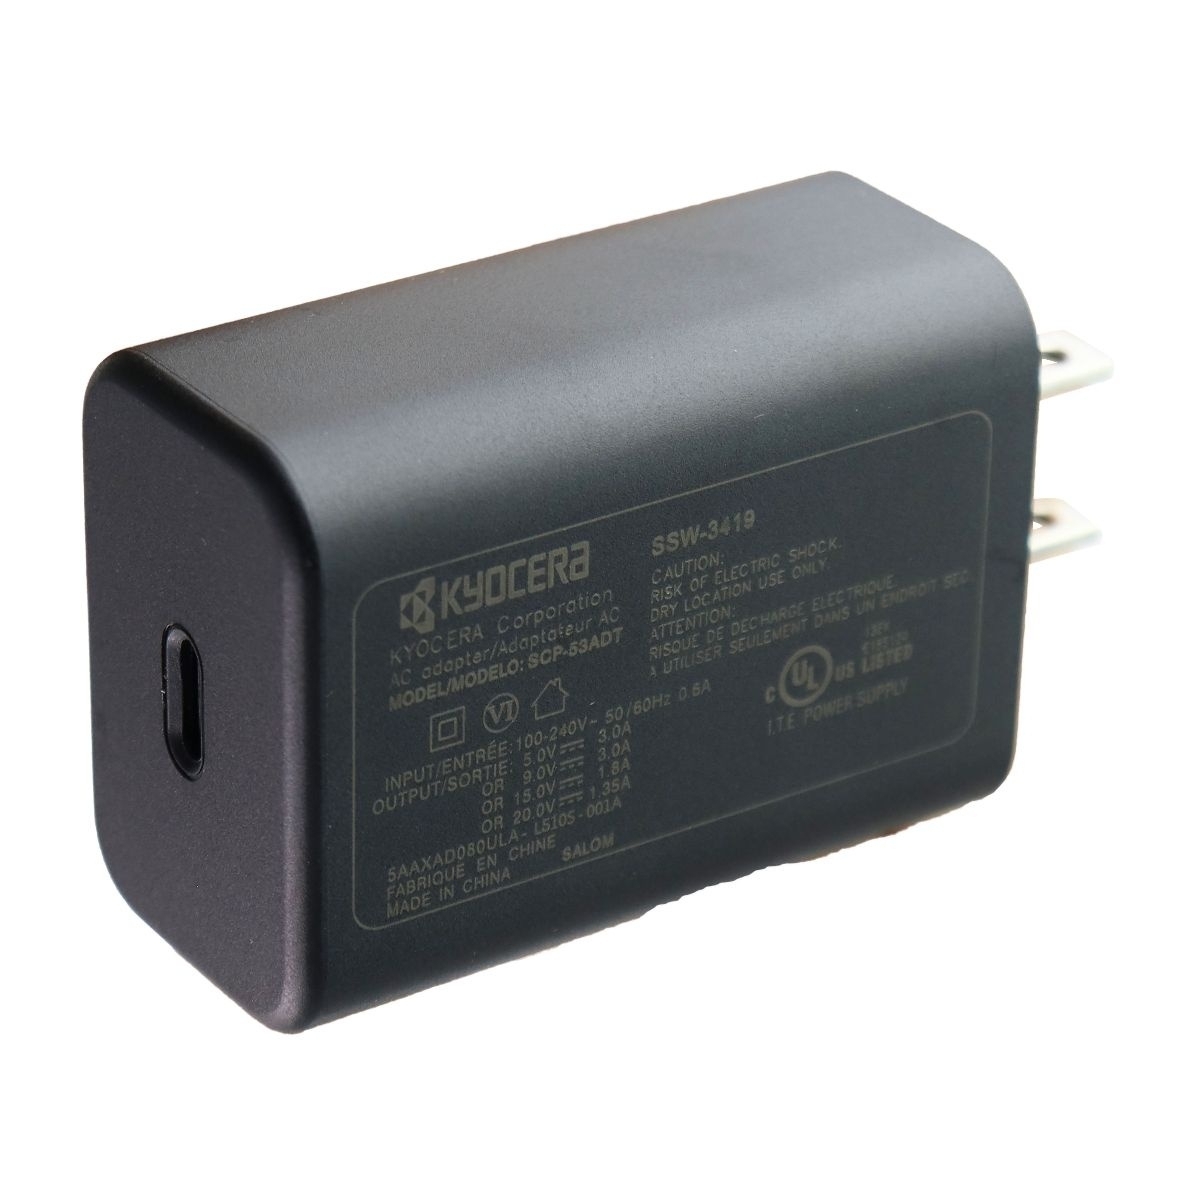 Kyocera (5V/3A) Adaptive AC Charger For Kyocera Smartphones (SCP-53ADT/SSW-3419)